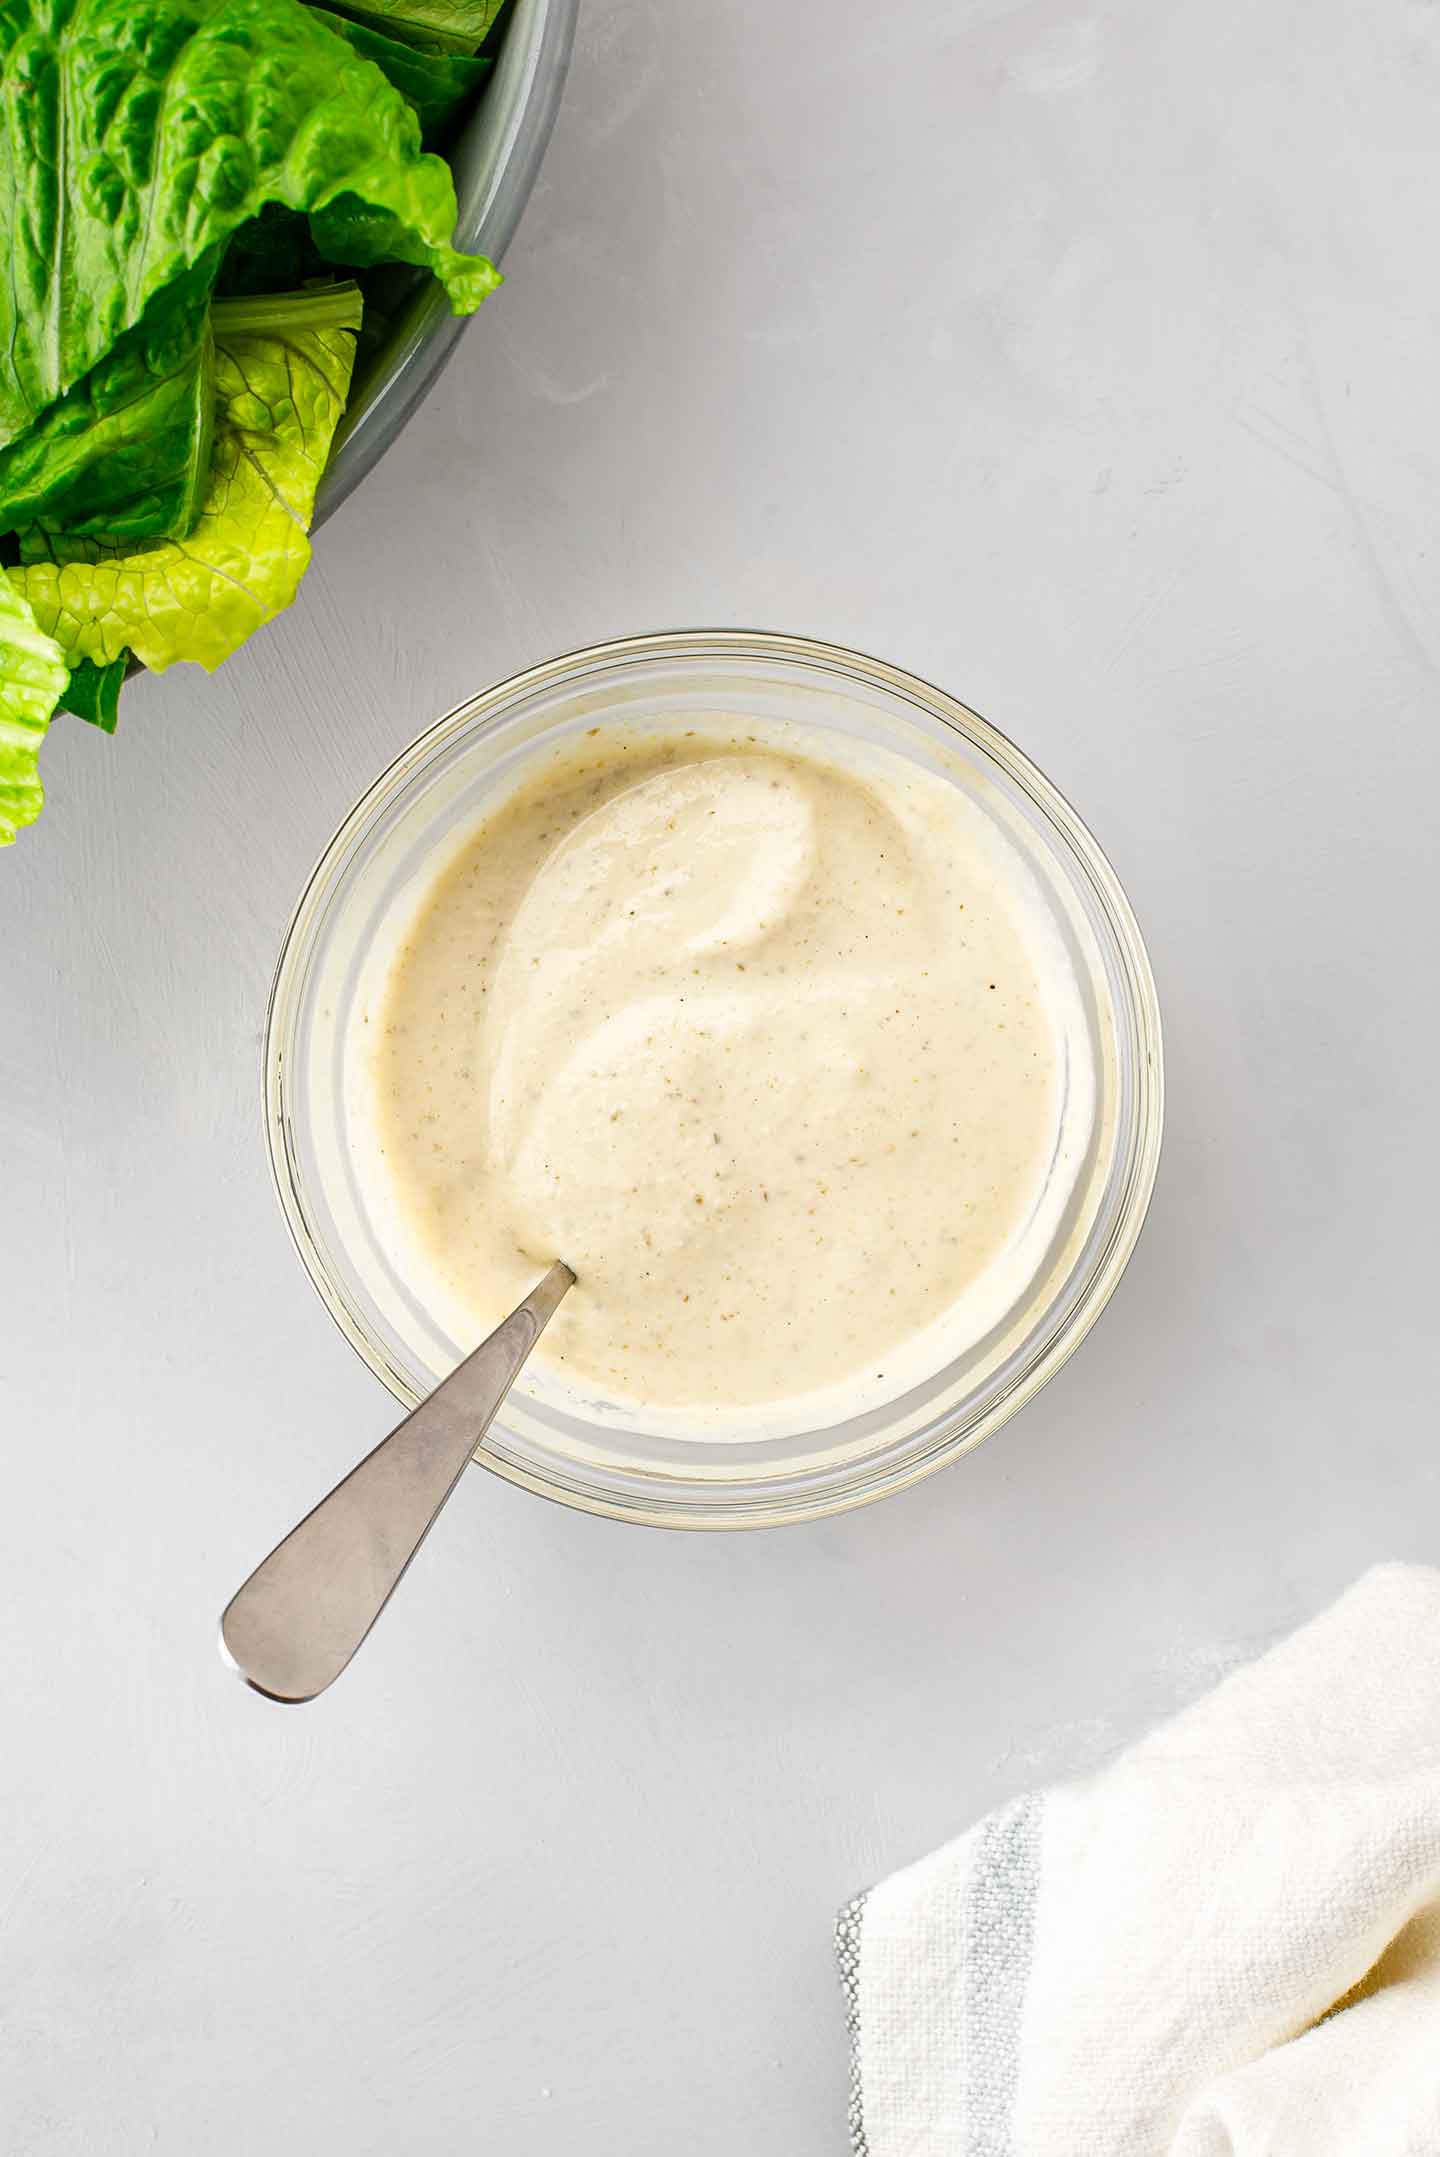 Top down view of creamy caesar dressing in a bowl with a spoon and romaine lettuce leaves in the corner